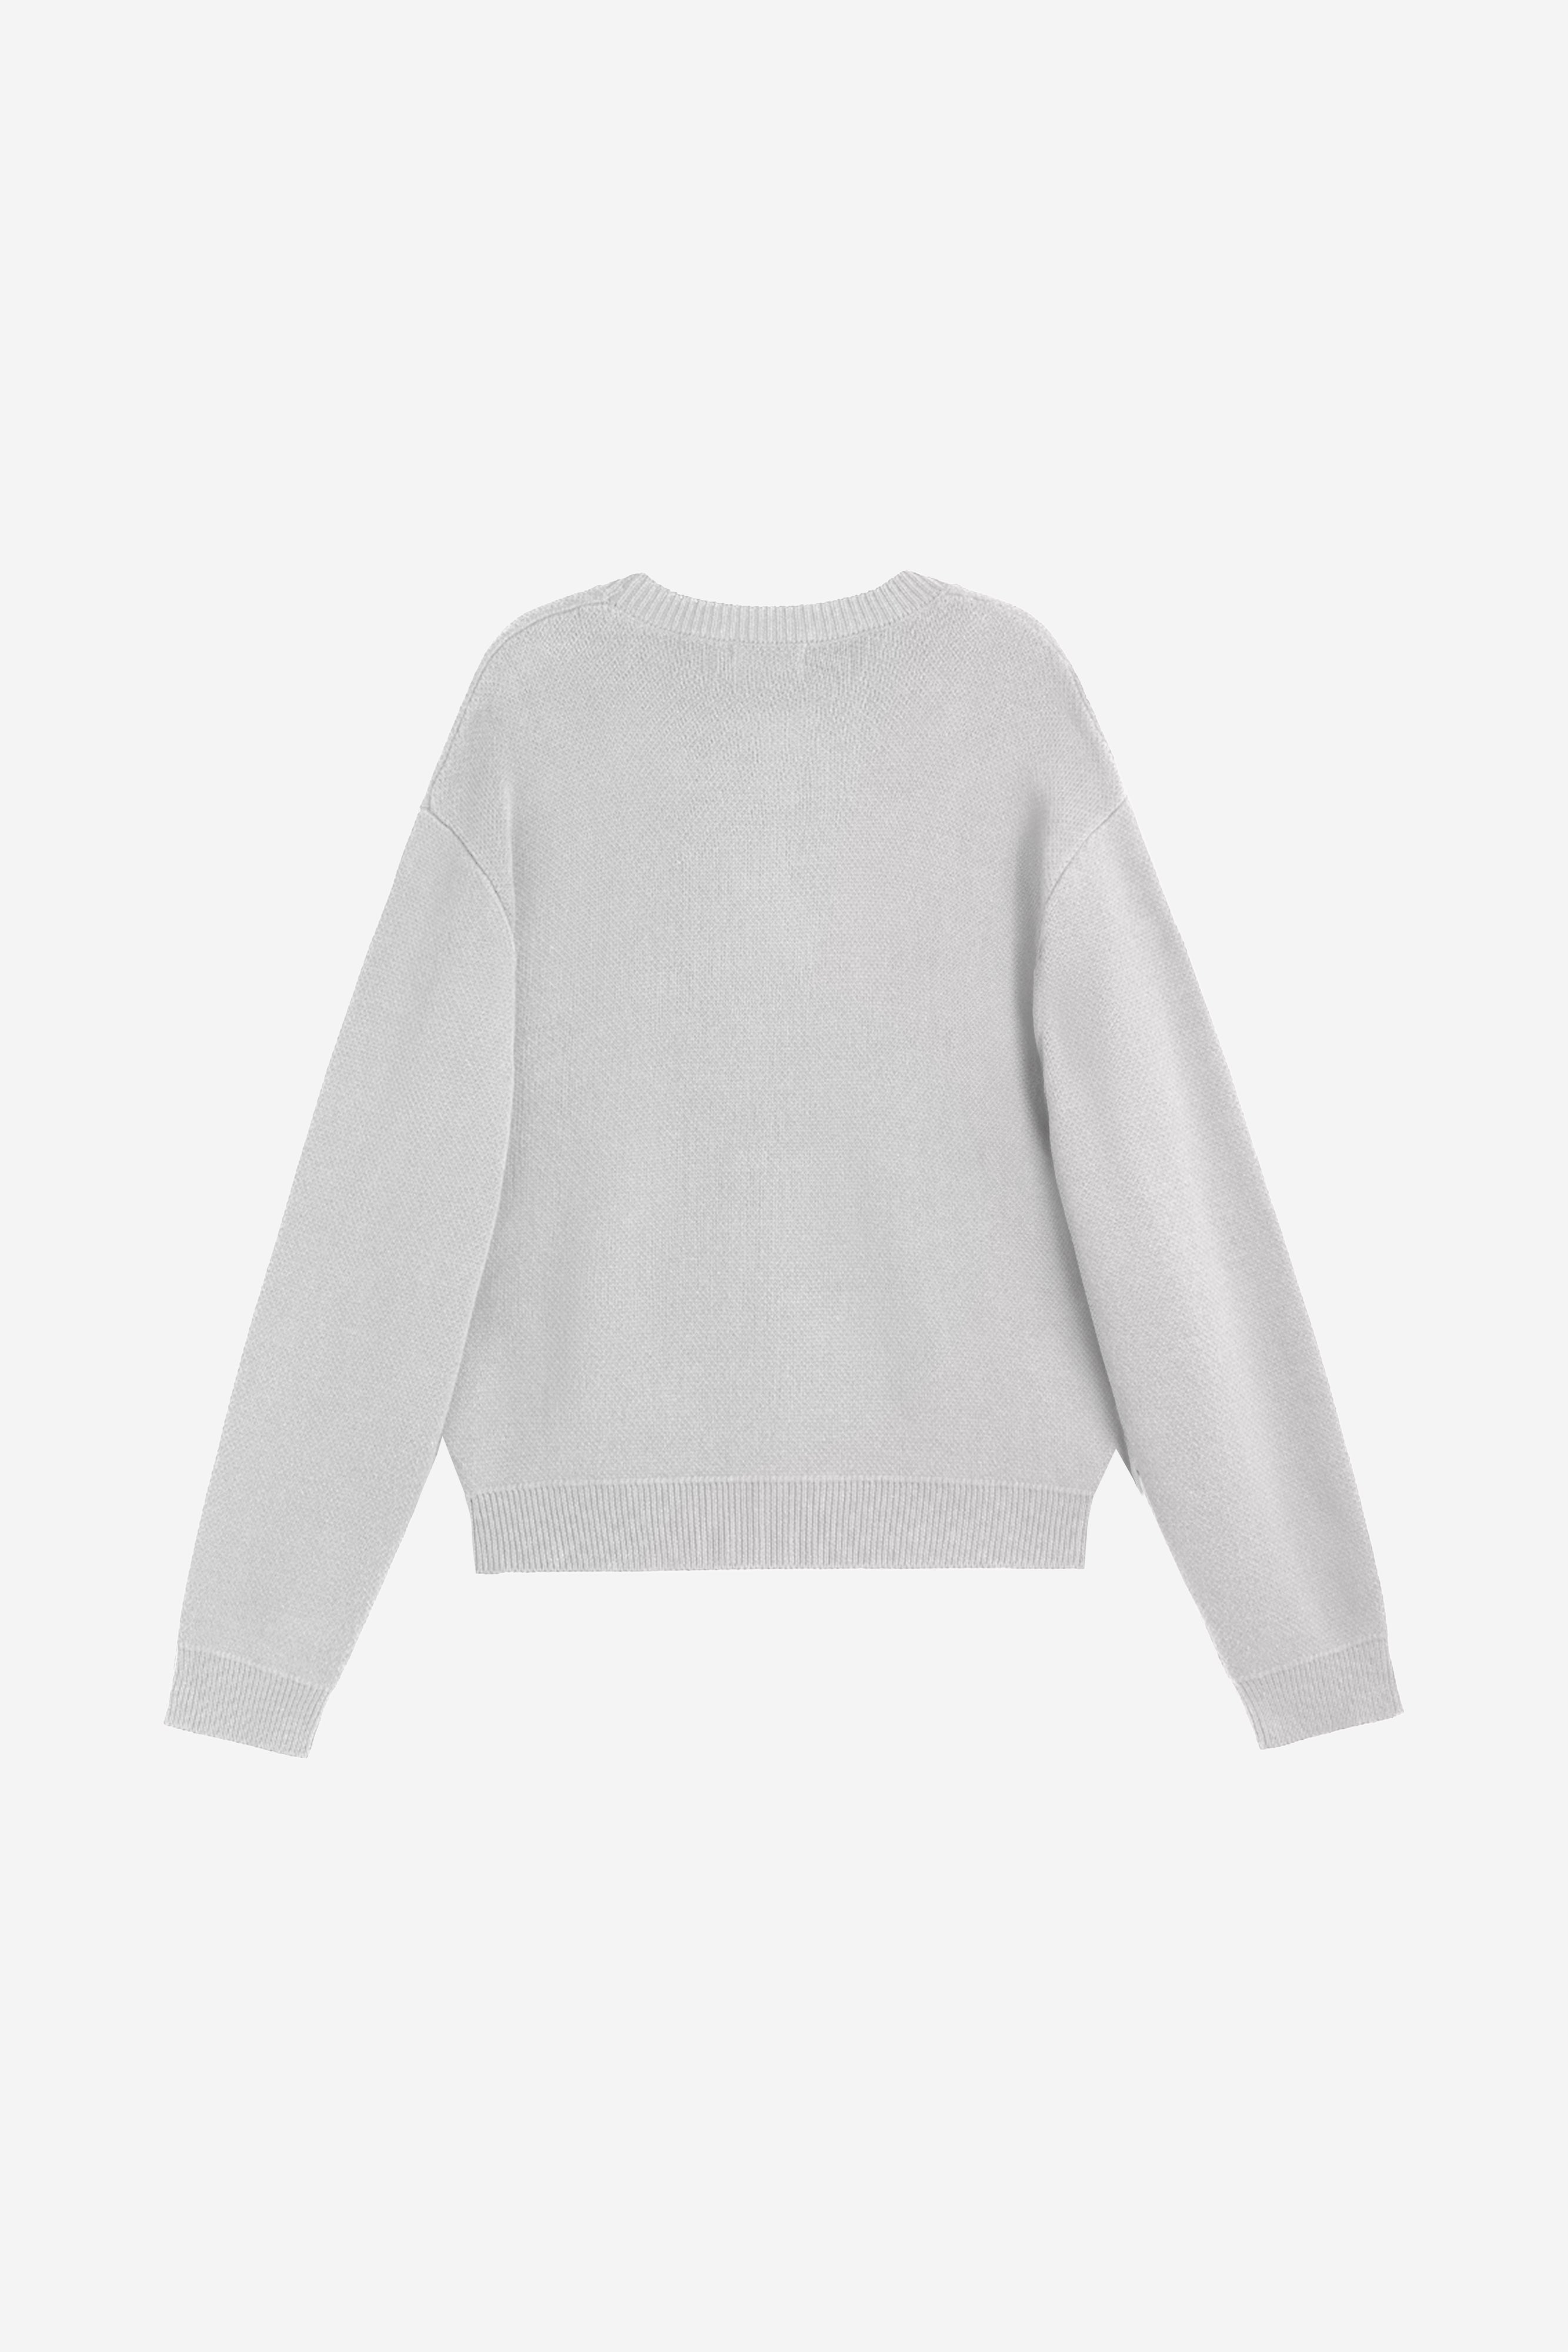 VALENTINE'S KNITTED SWEATER LIGHT GREY